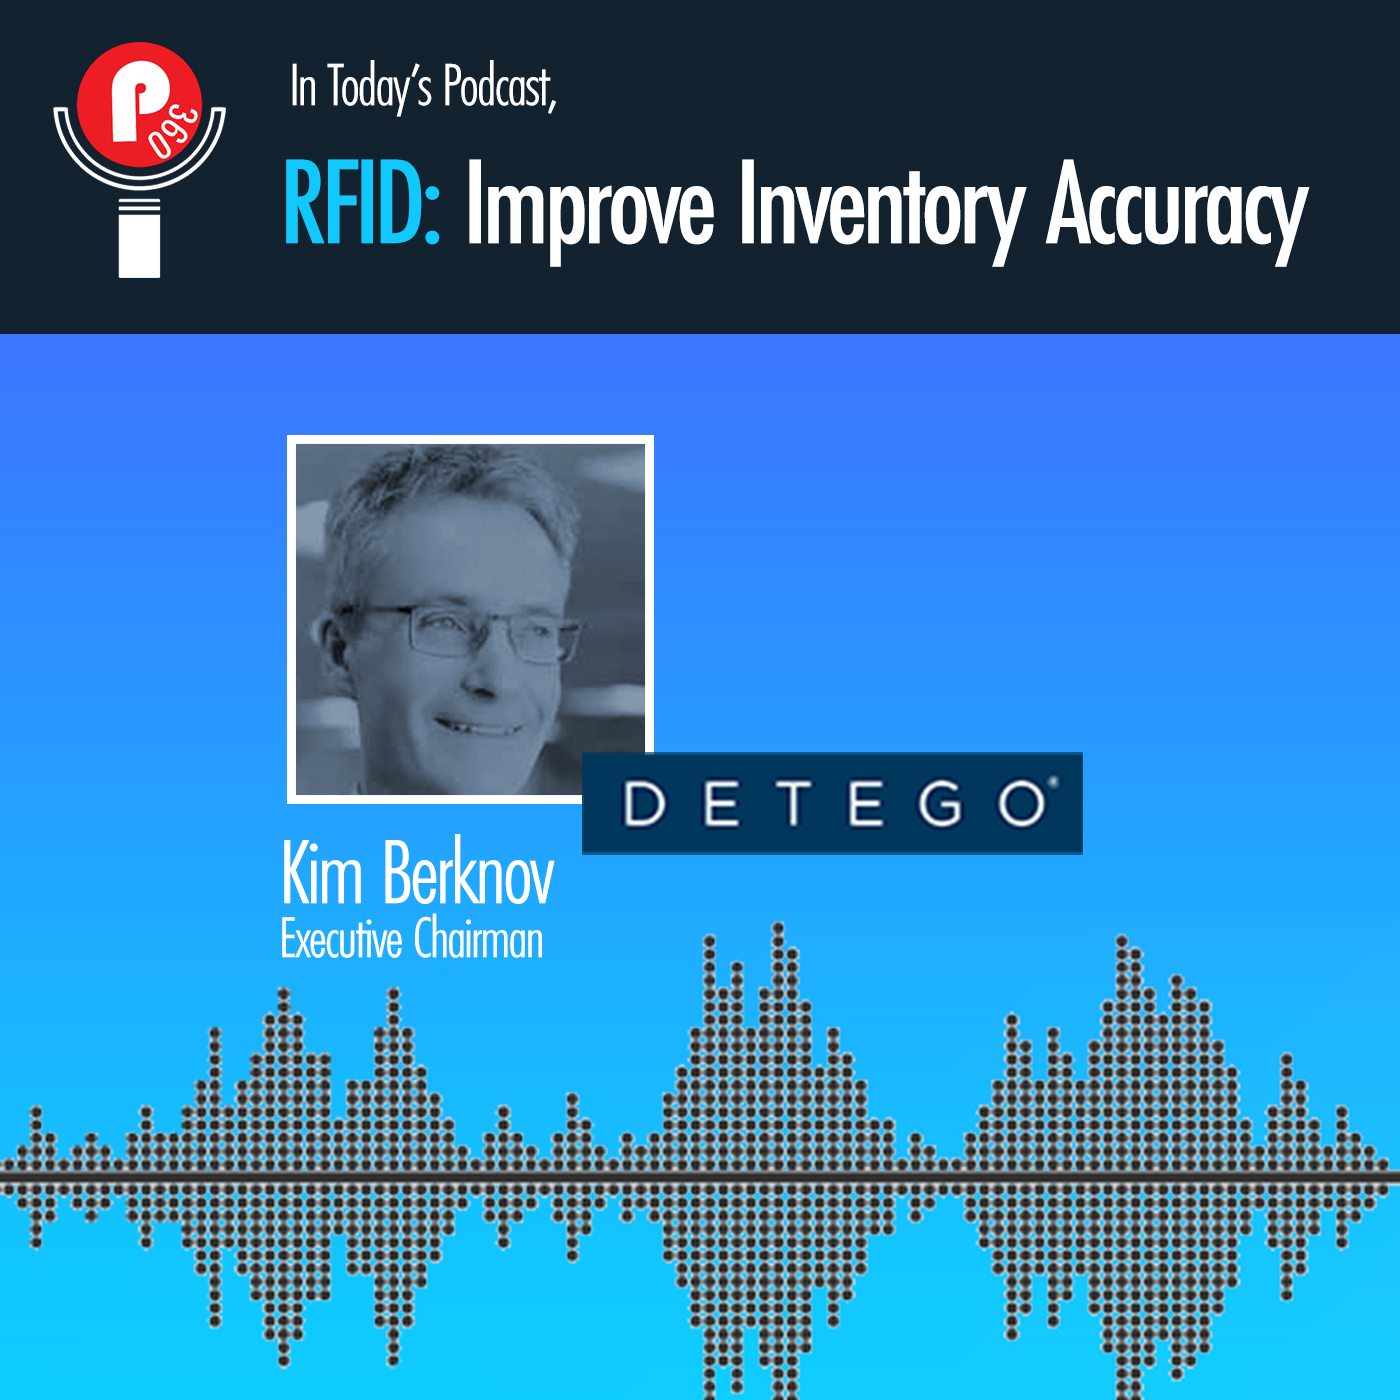 RFID: Improve Inventory Accuracy Image